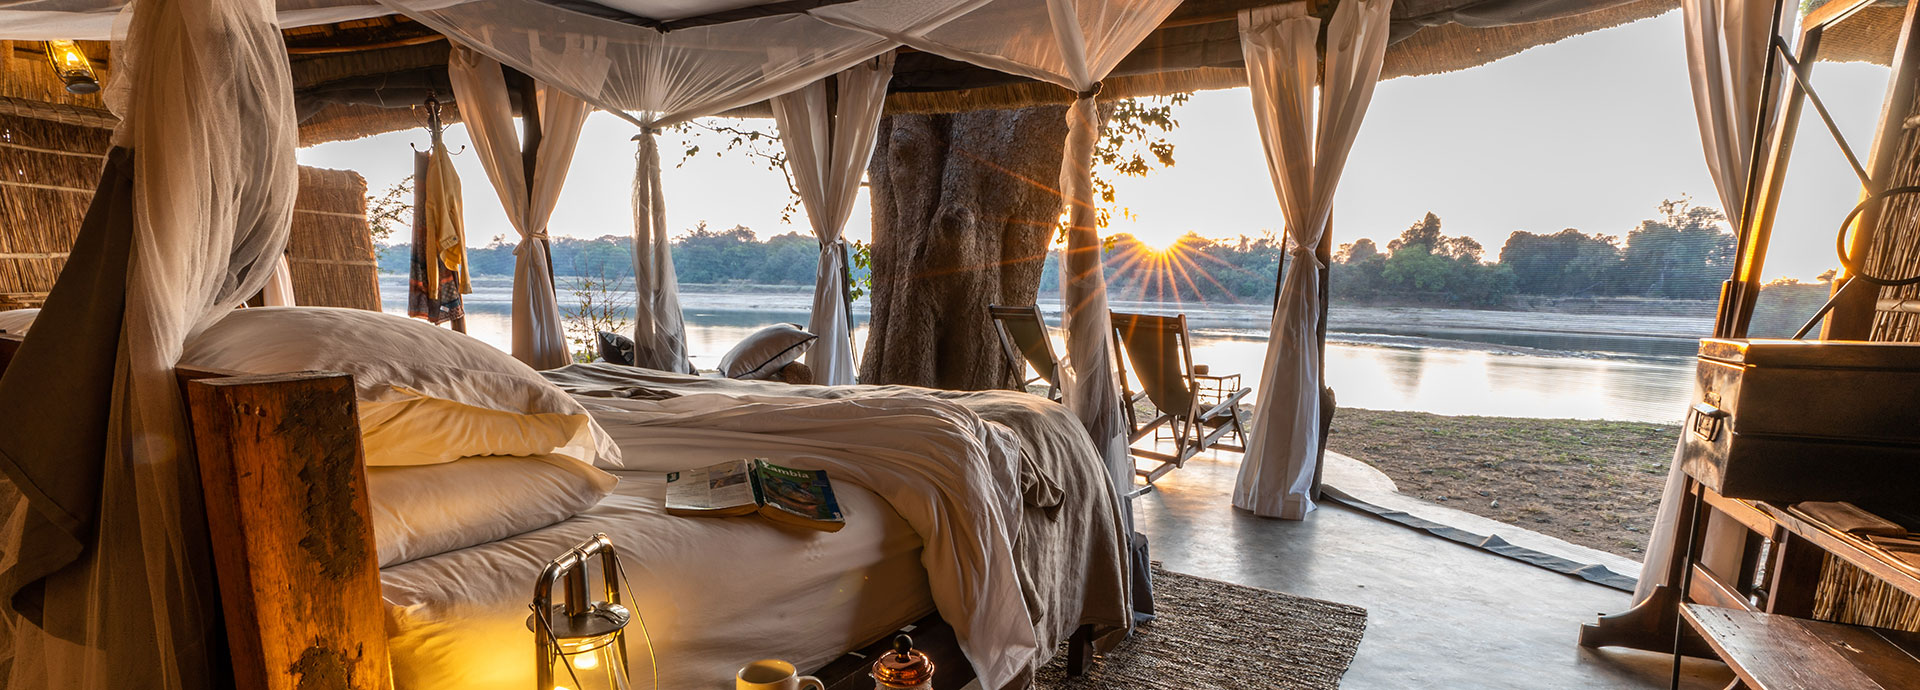 A luxurious tented camp set up with views to match at Mchenja